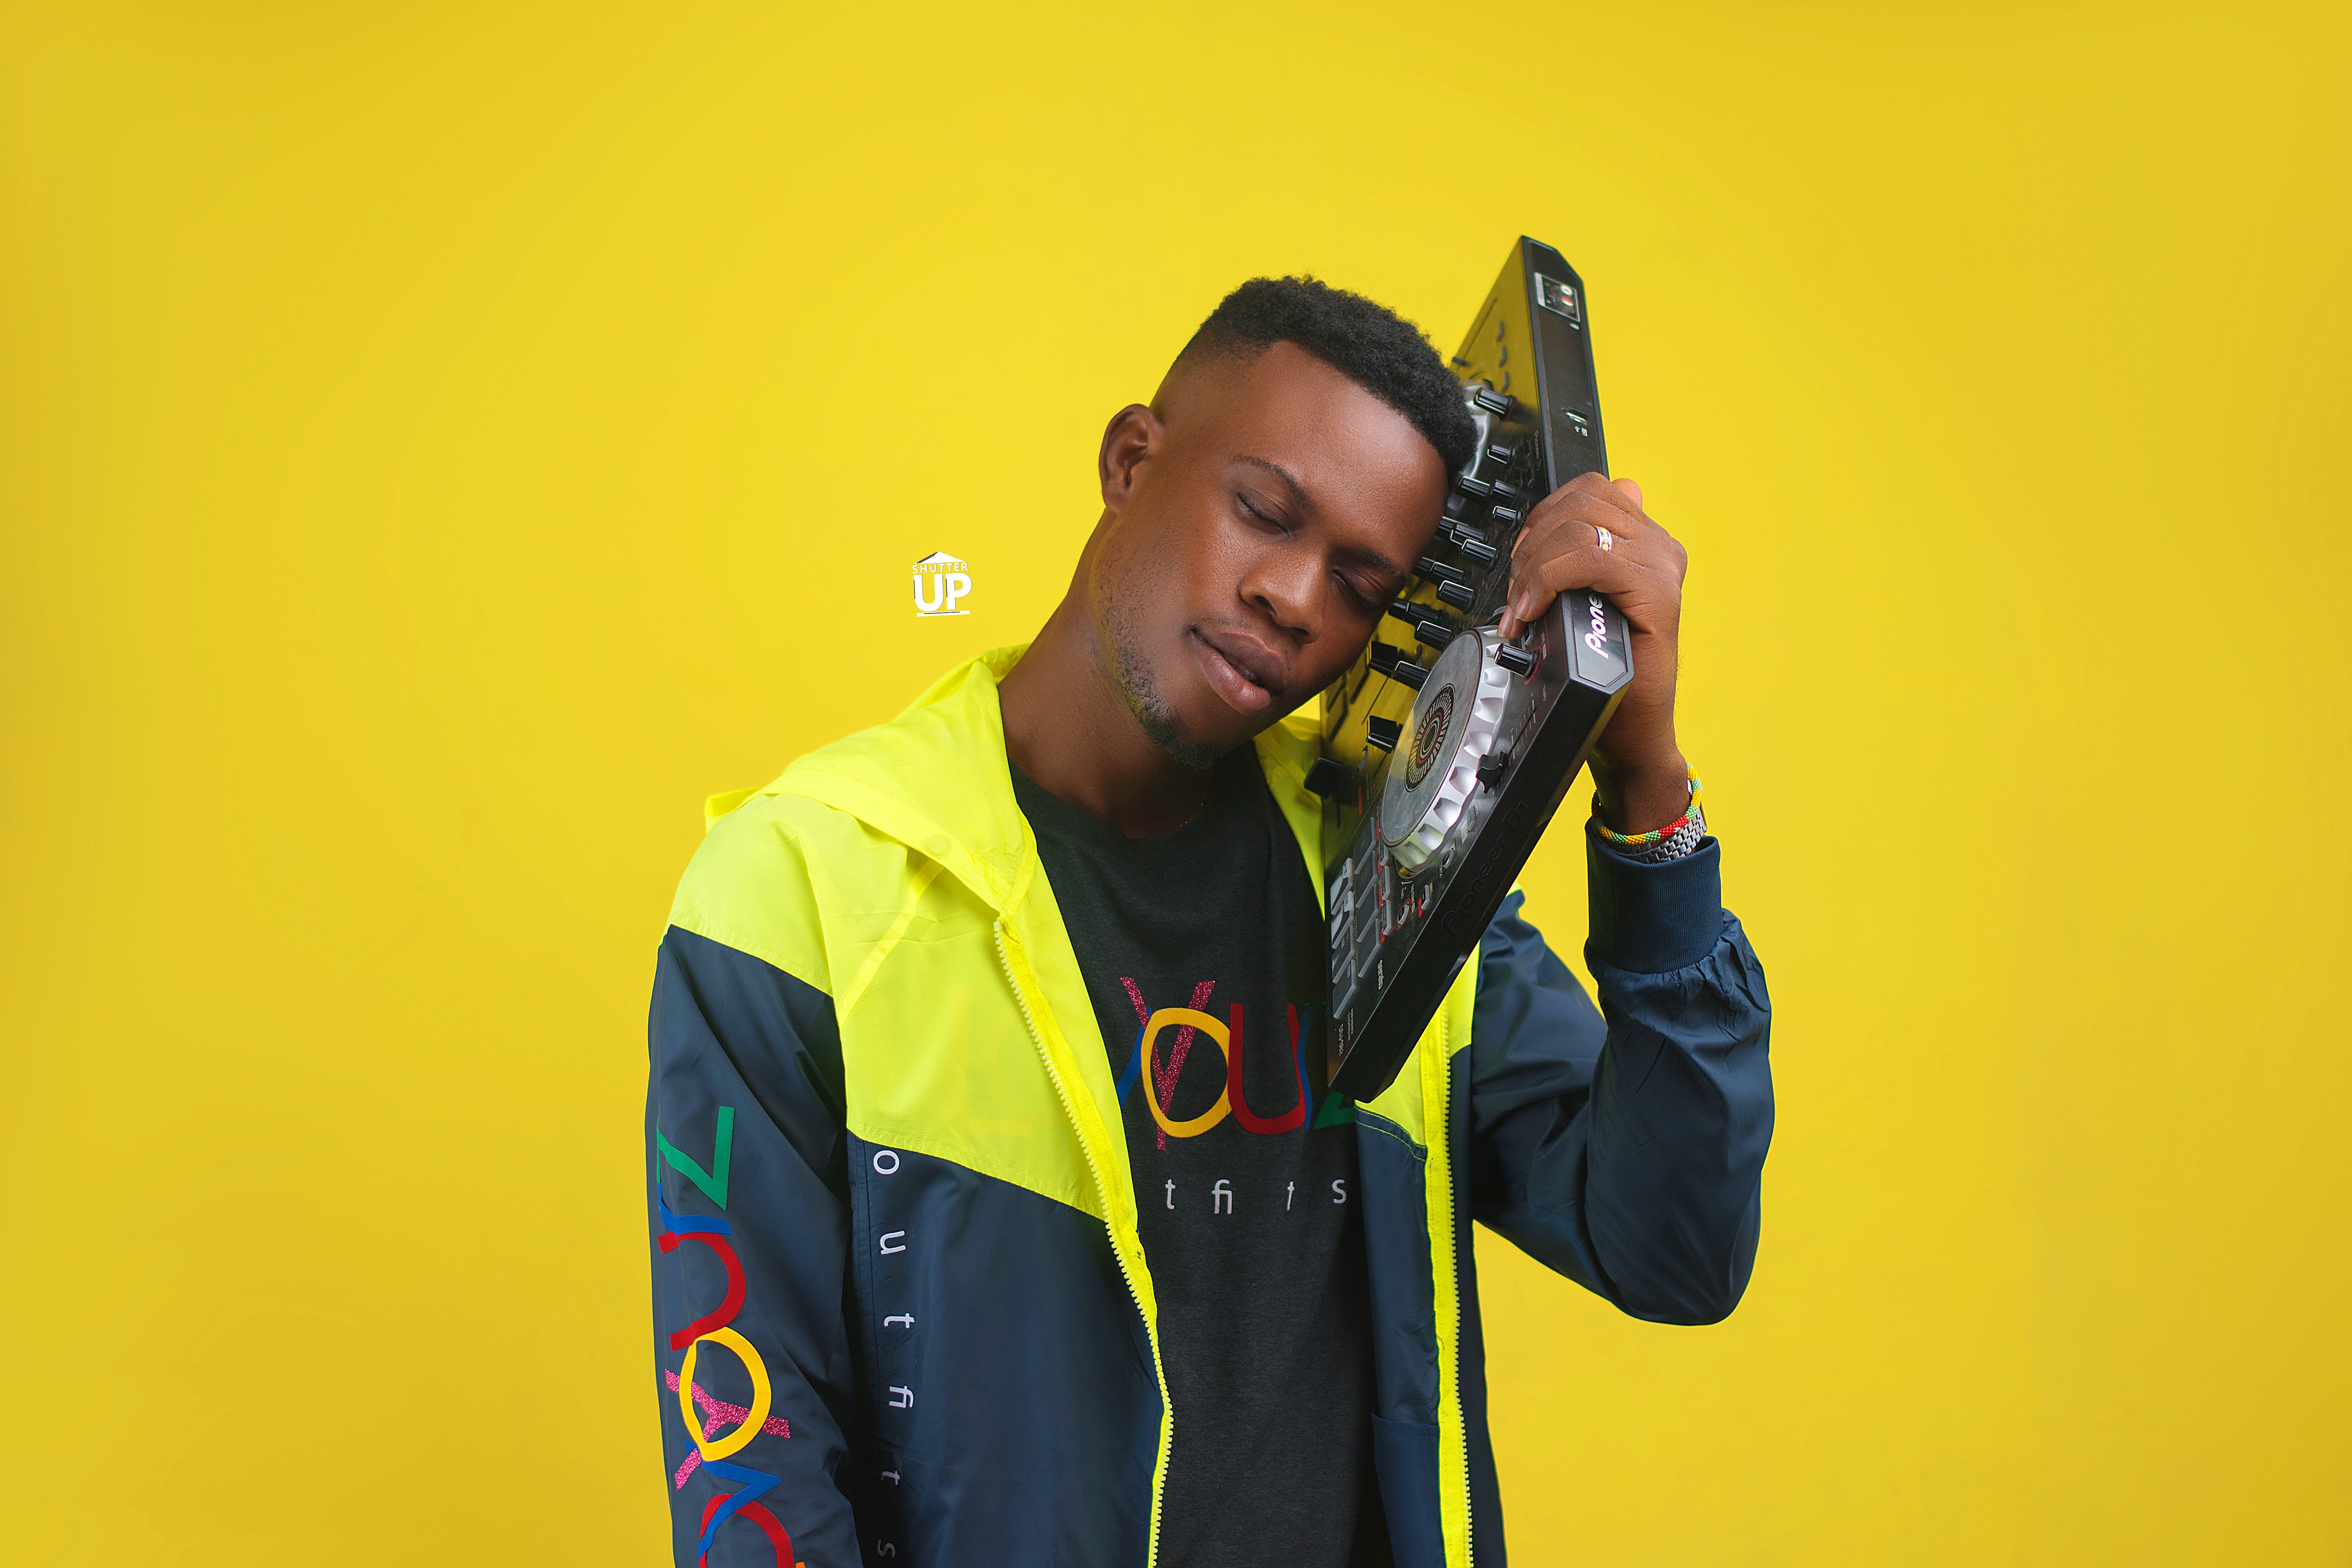 Meet Ghana’s Showstopper DJ Tellerone; The Future Sound Of Africa